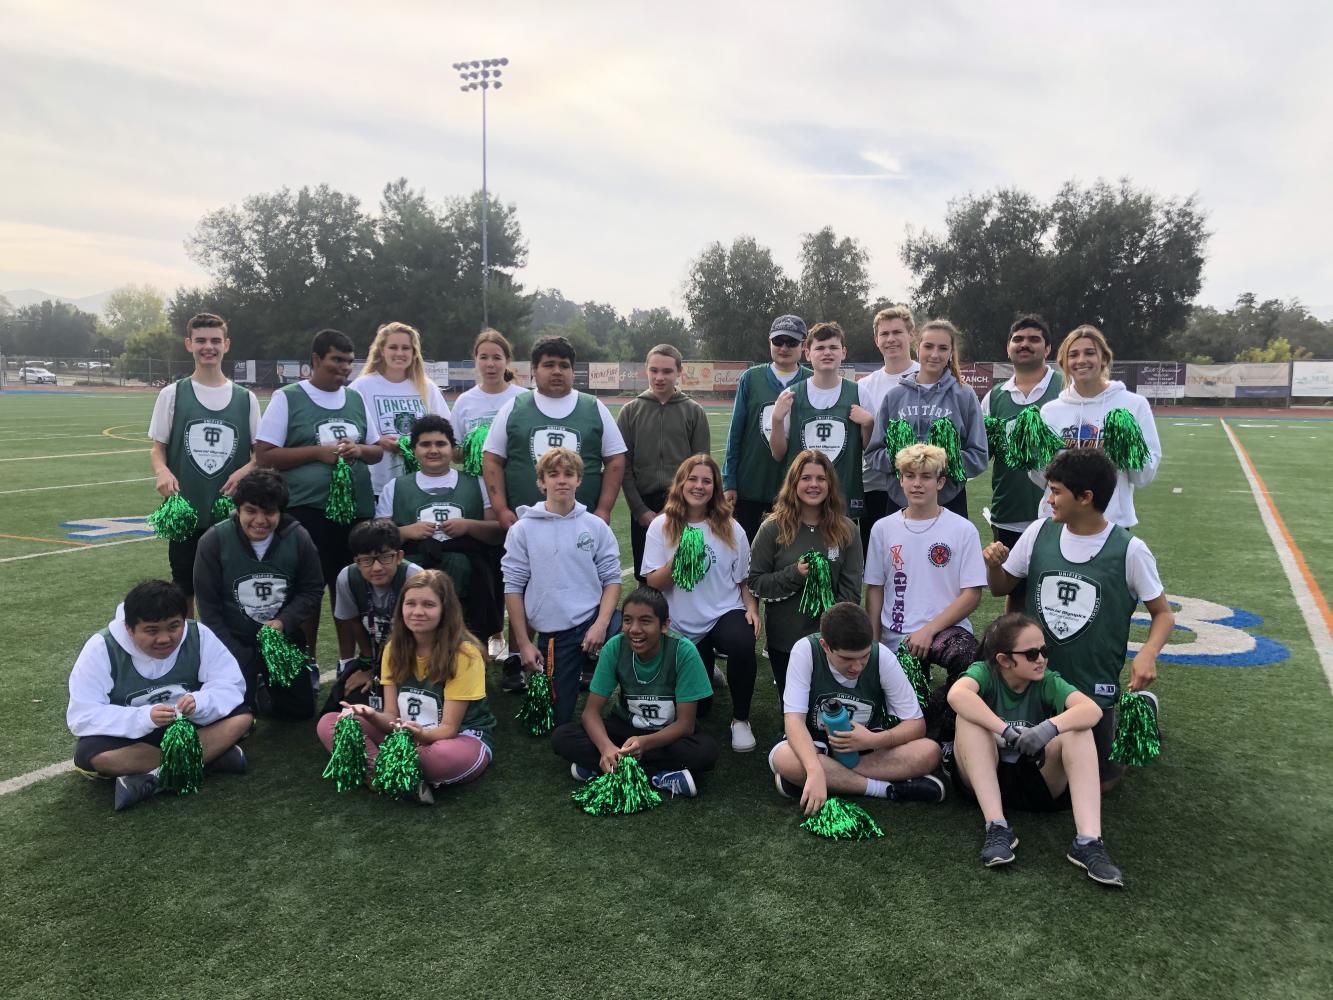 The+CVUSD+Unified+Sports+team+at+their+first+kickball+game+At+Westlake+High+School